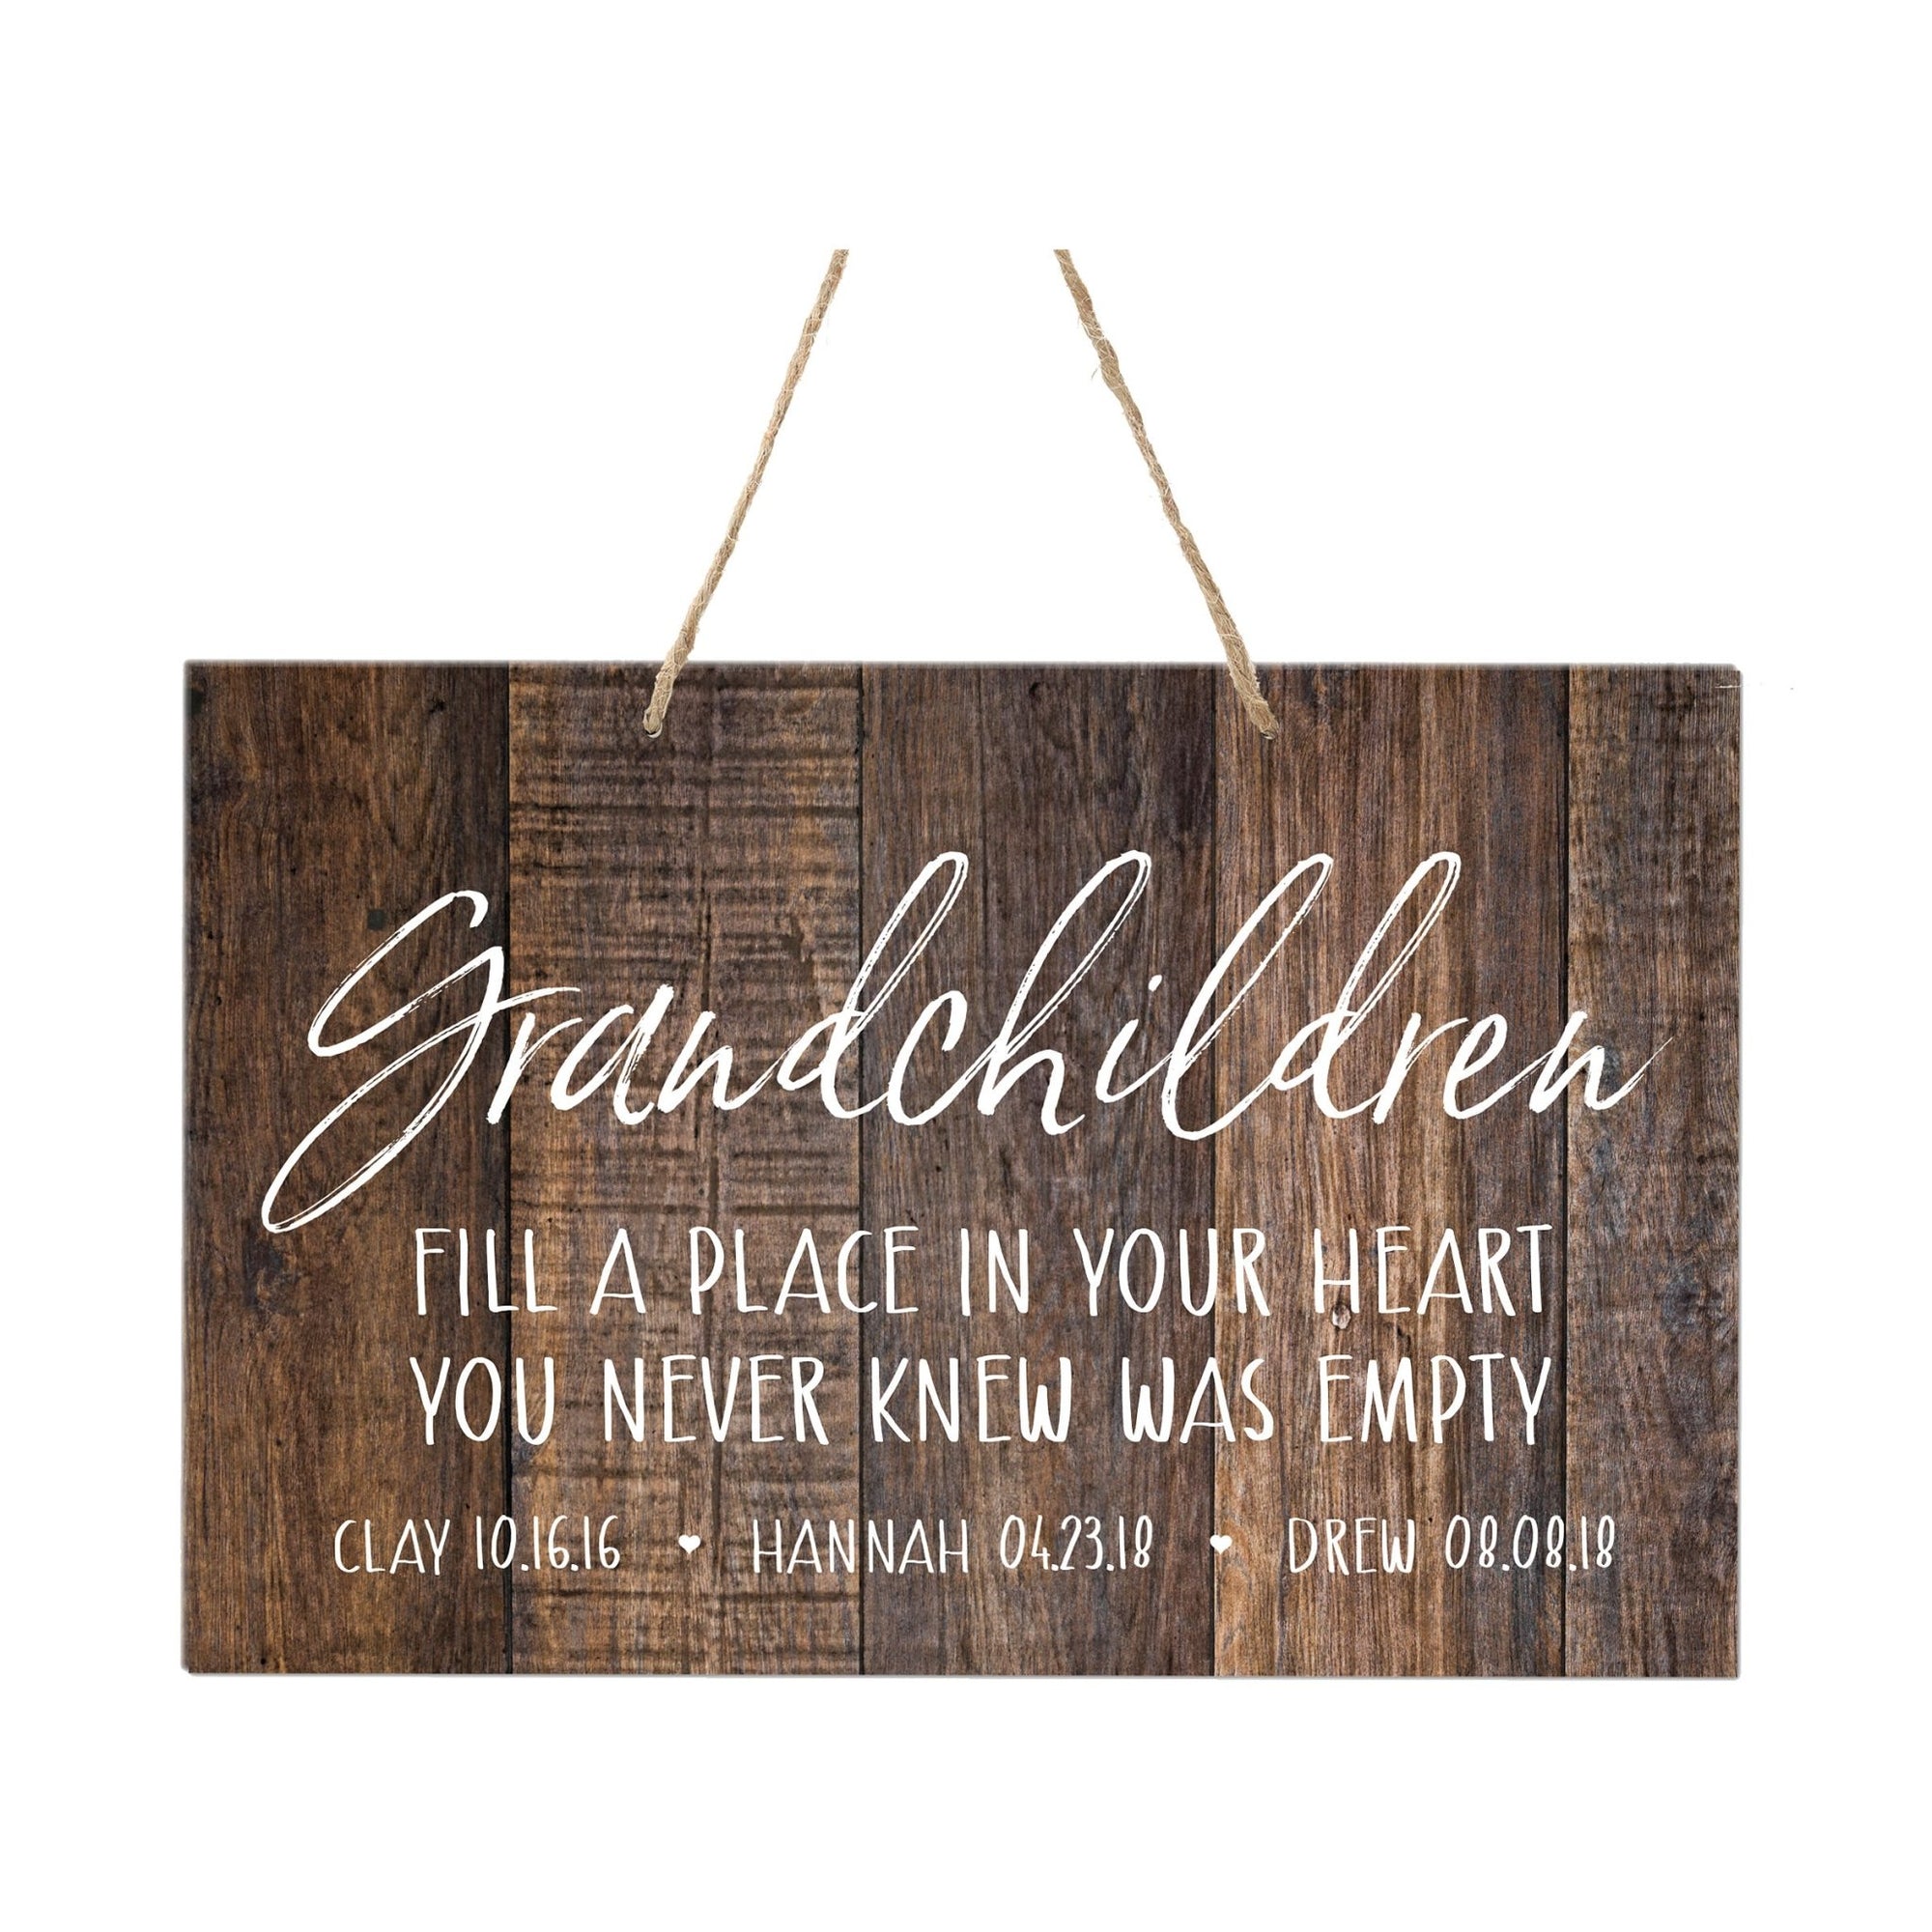 Custom Inspirational Wooden Wall Hanging Rope Sign For Grandparents 12” x 8”- Fill A Place In Your Heart - LifeSong Milestones